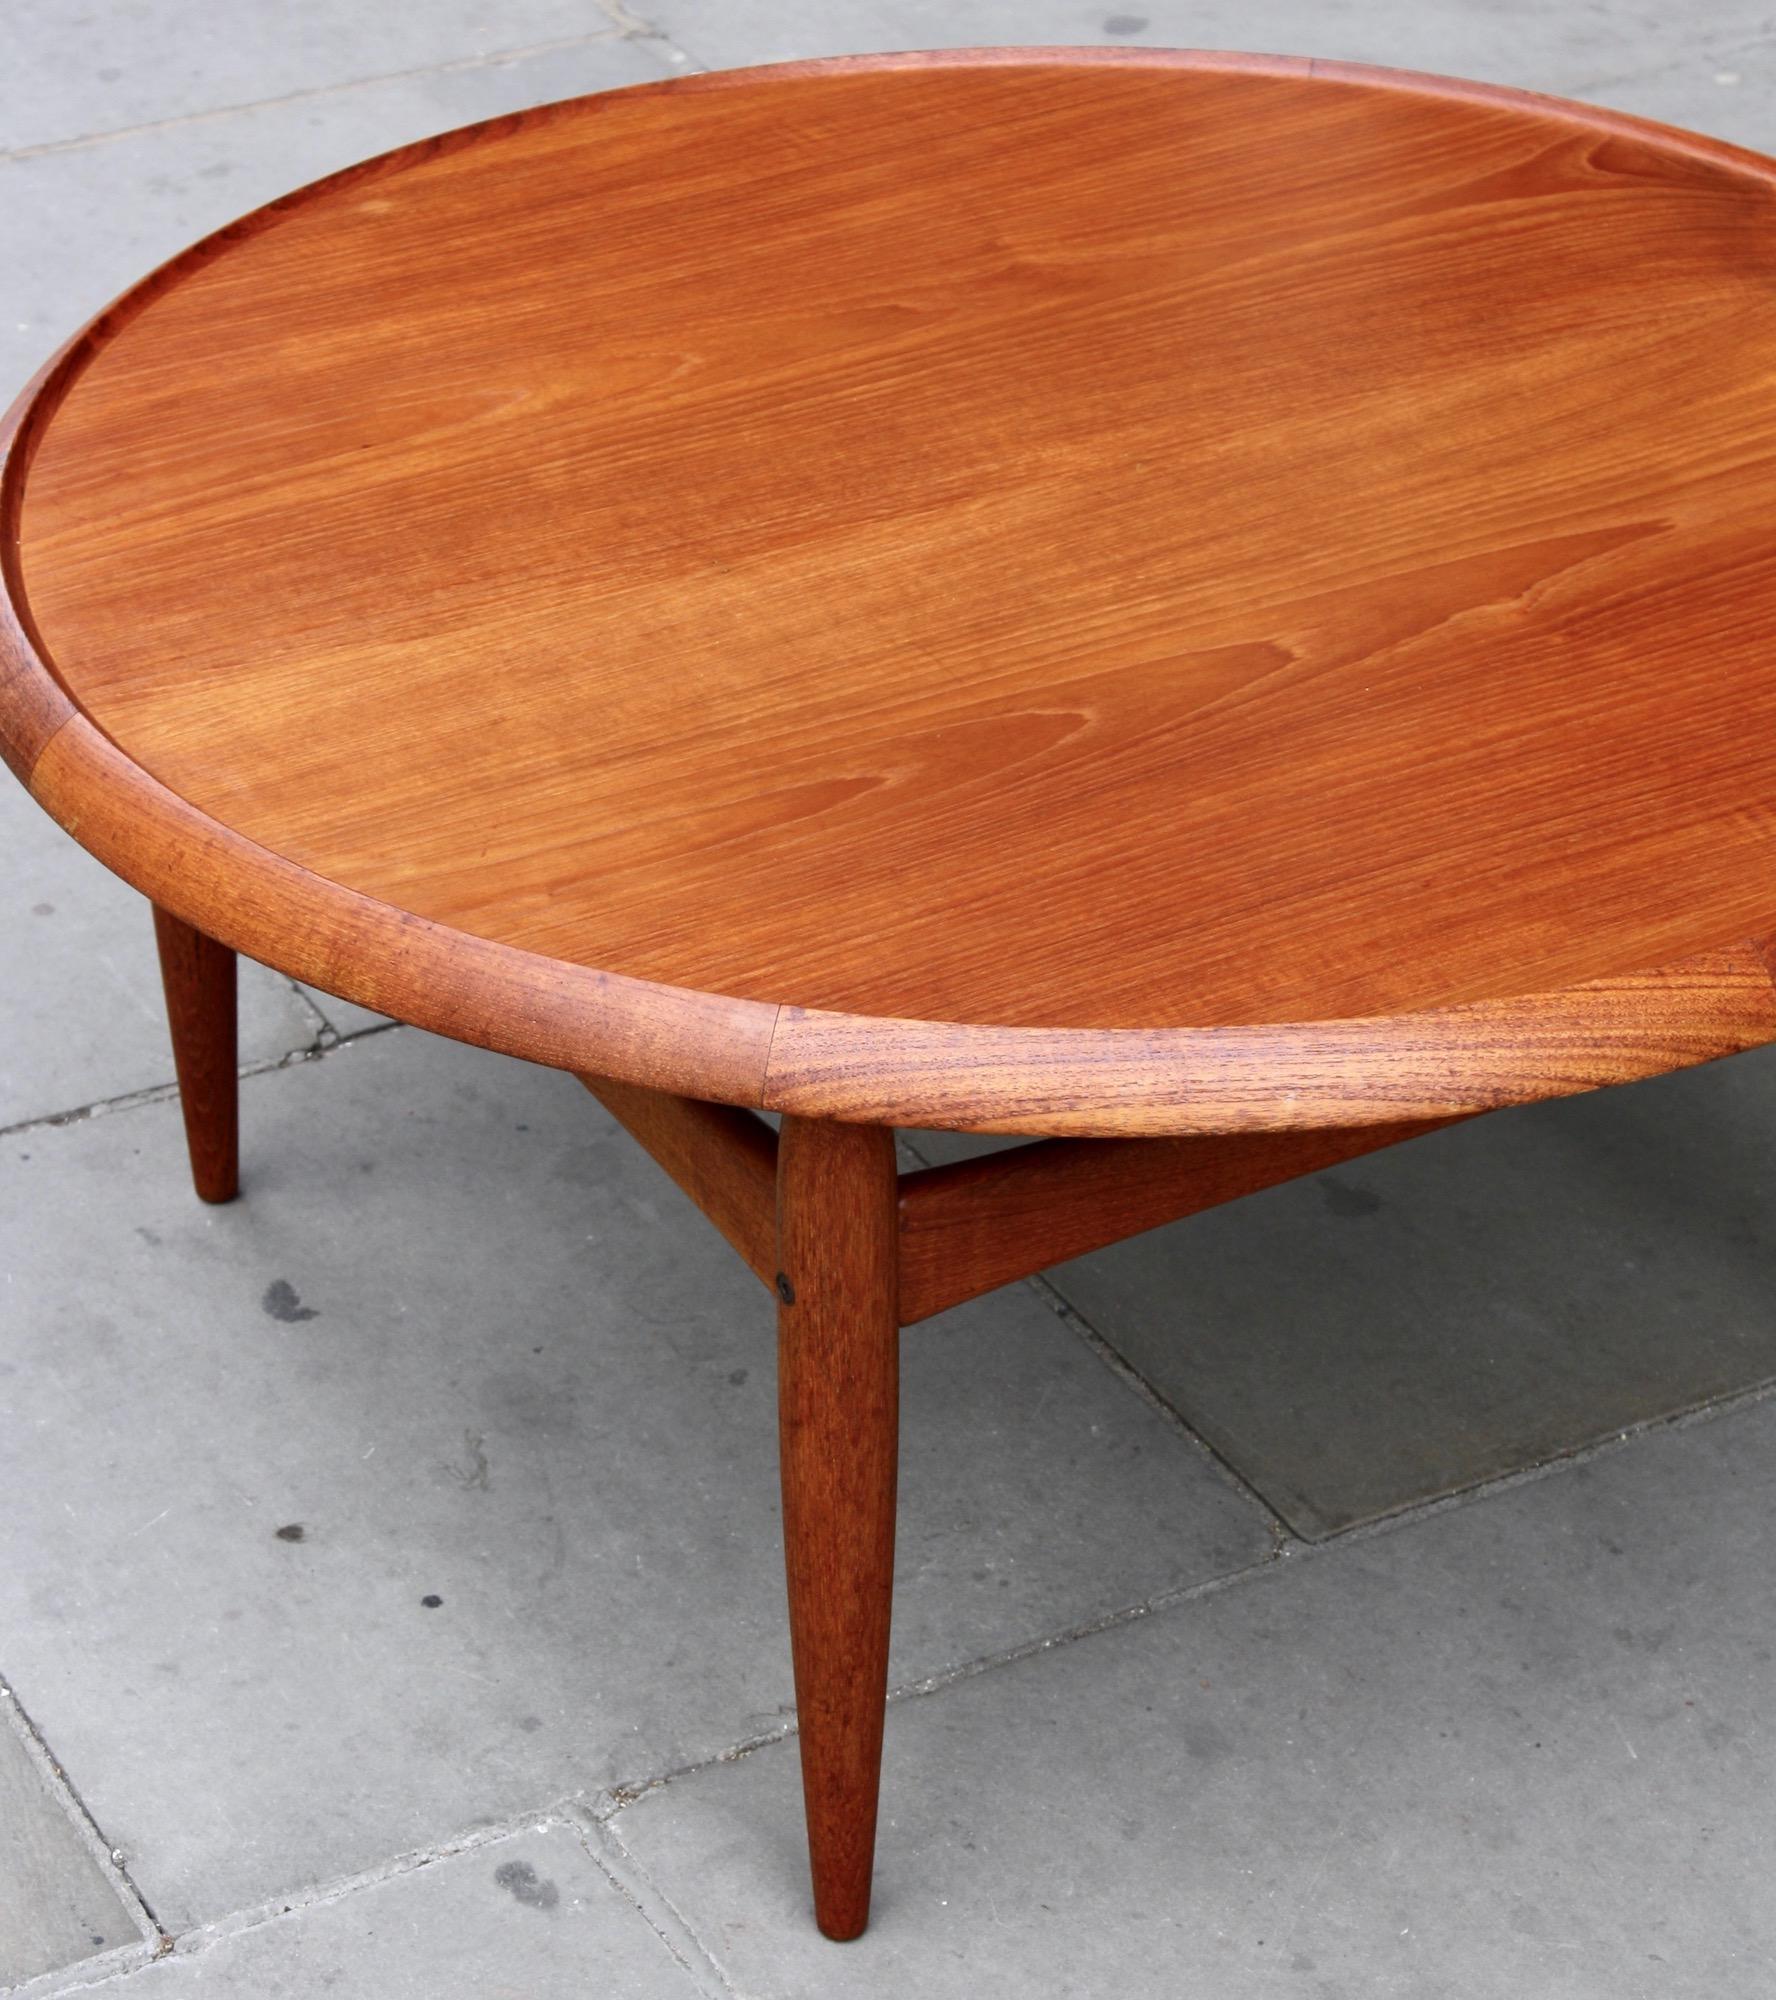 A vintage 1950s teak and formica lounge table. The circular tabletop is reversible, inlaid with black formica on one side and teak on the other. The tapered frame is carved of solid teak. Designed by Ejvind. A. Johansson in 1955, and manufactured by